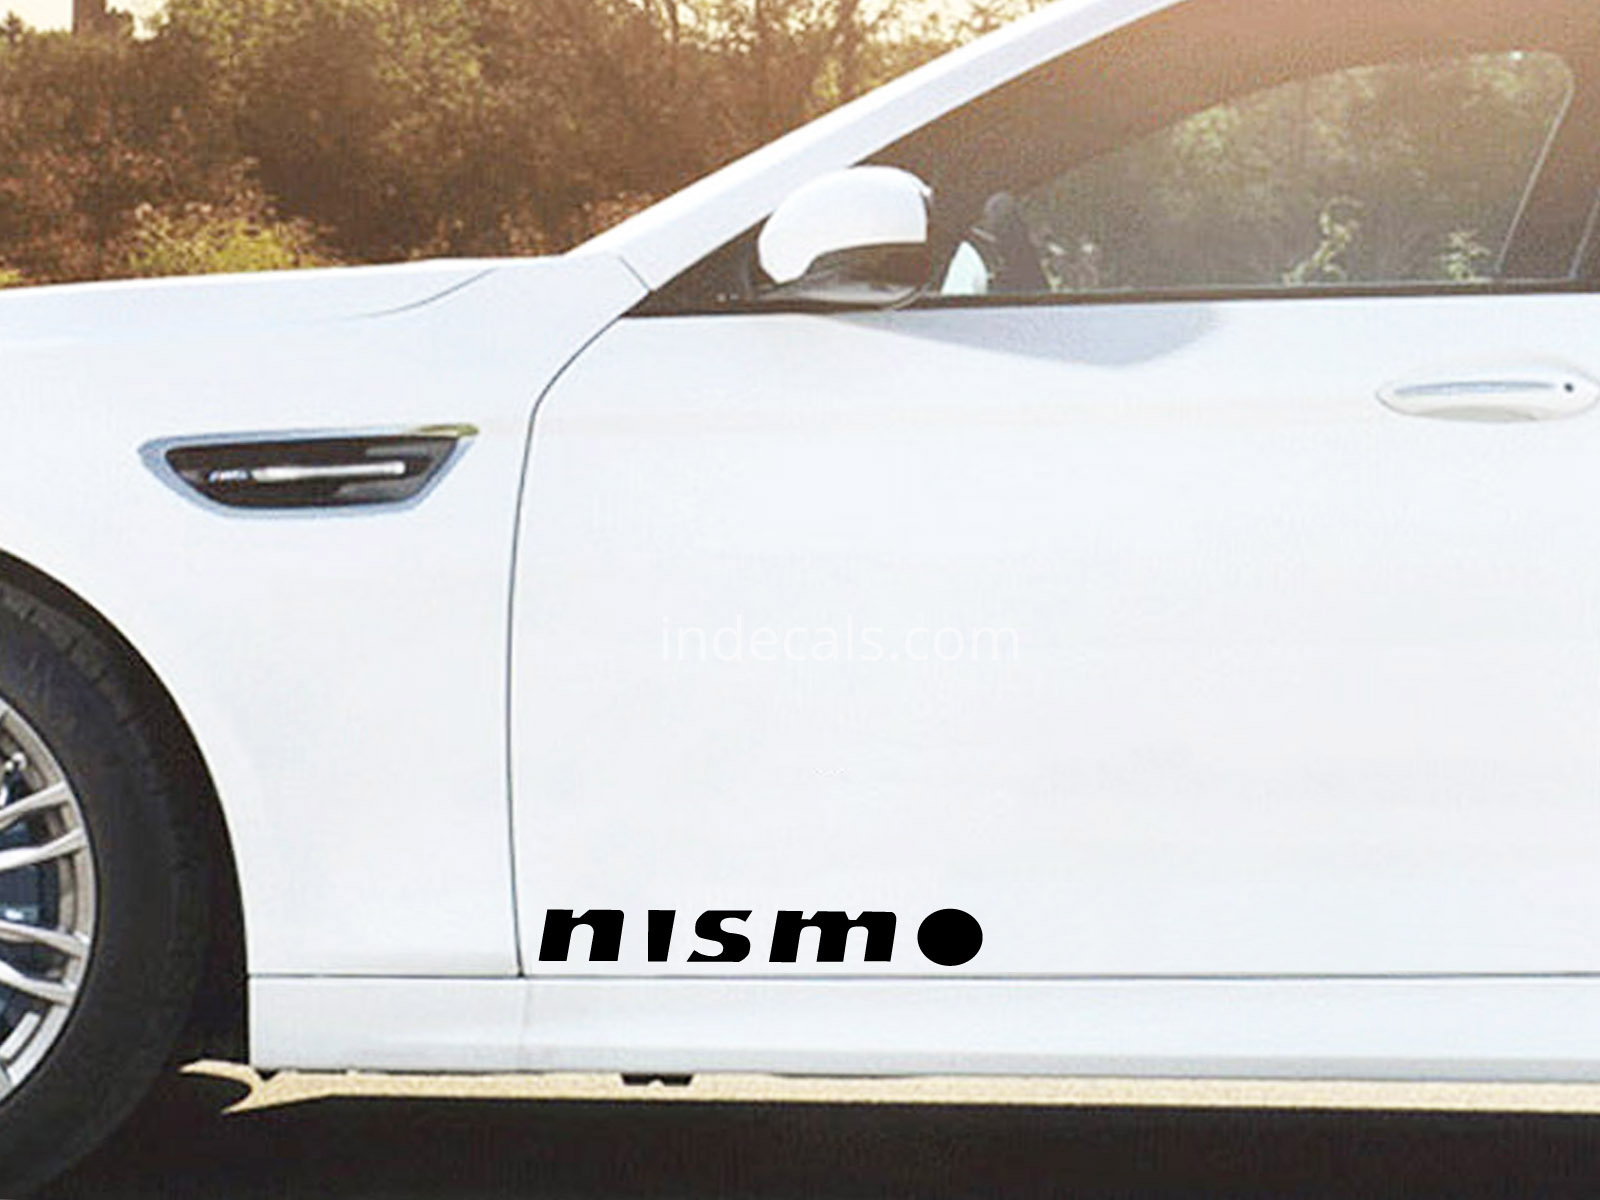 2 x Nismo Stickers for Doors Large - Black